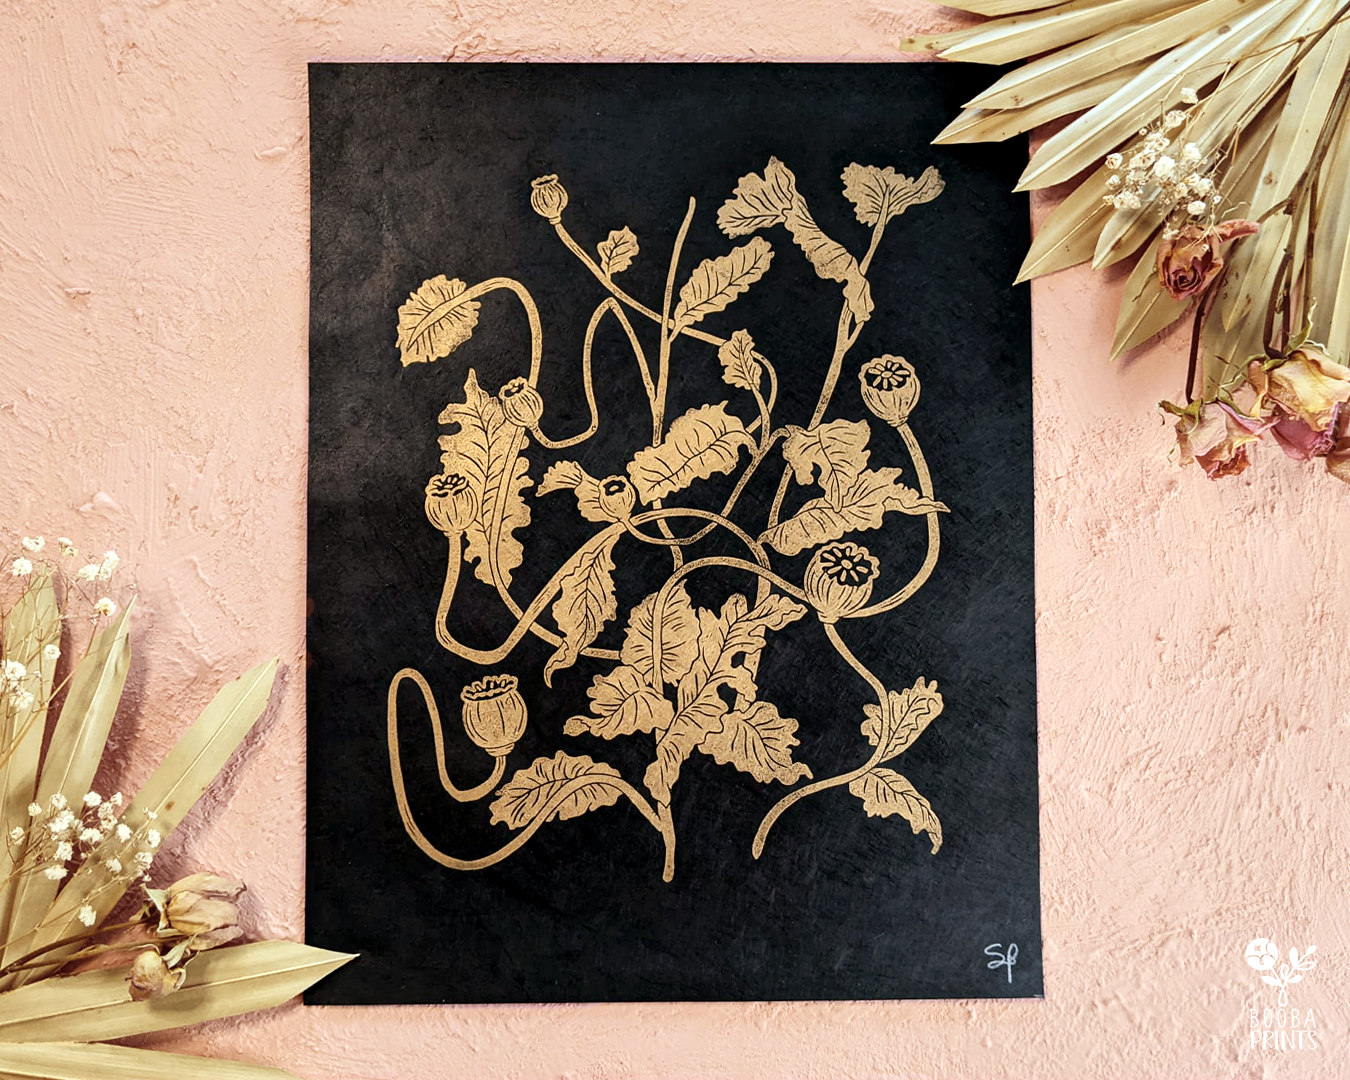 A collection of my floral designs and original handmade linocut prints. Prints with metallic gold ink printed on black paper, women and flower prints, inspiration prints. Art by Booba Prints.